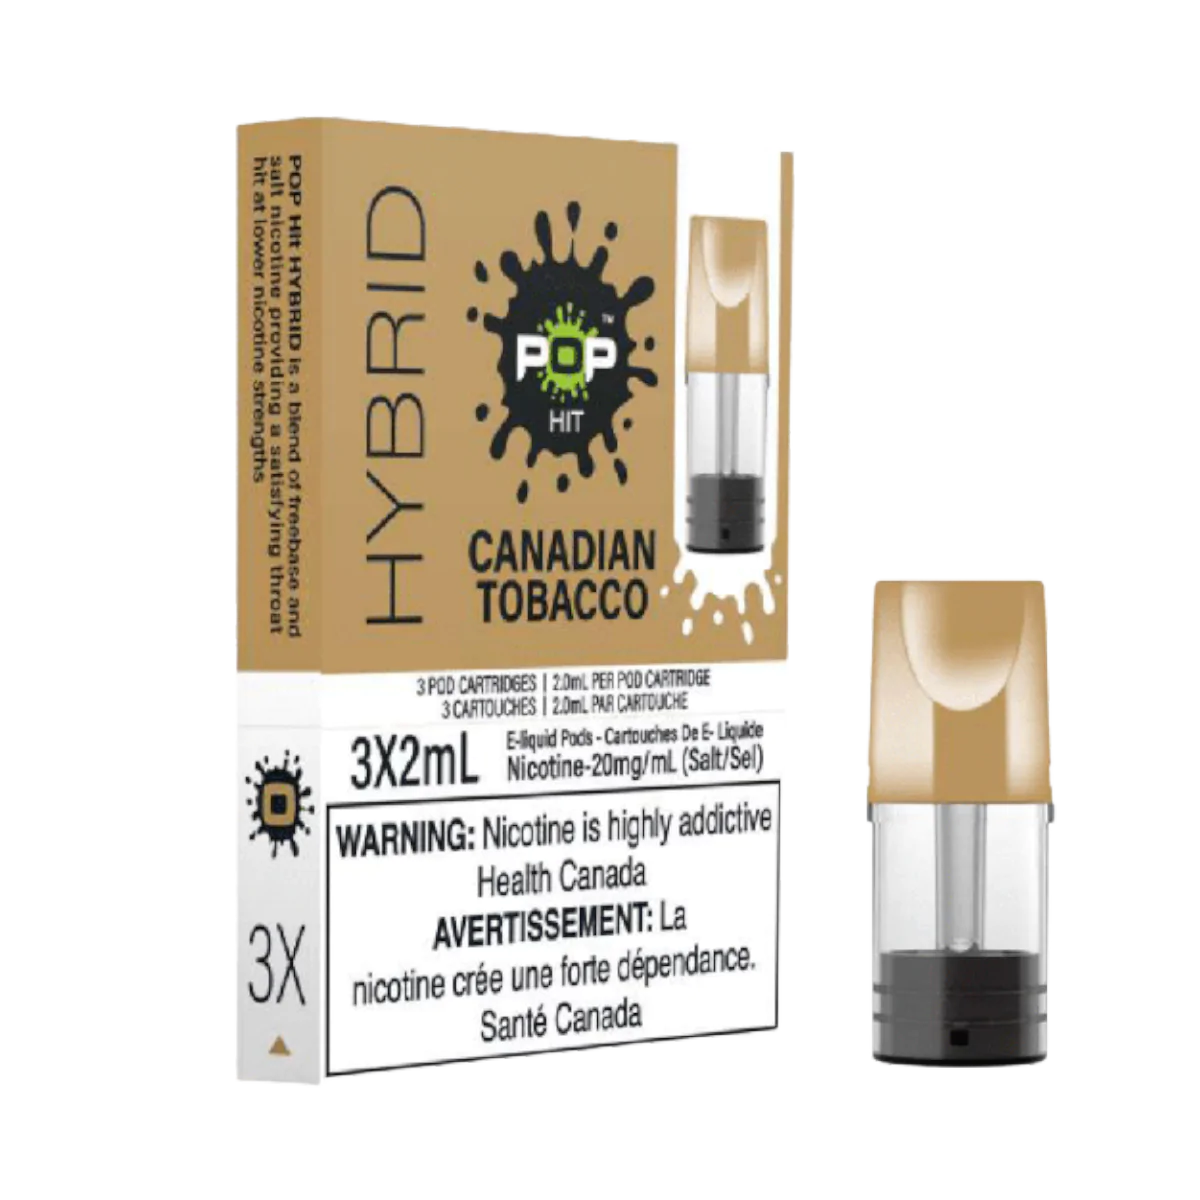 Canadian Tobacco - Pop Hit Hybrid - 20mg - 5pc/Carton - EXCISED